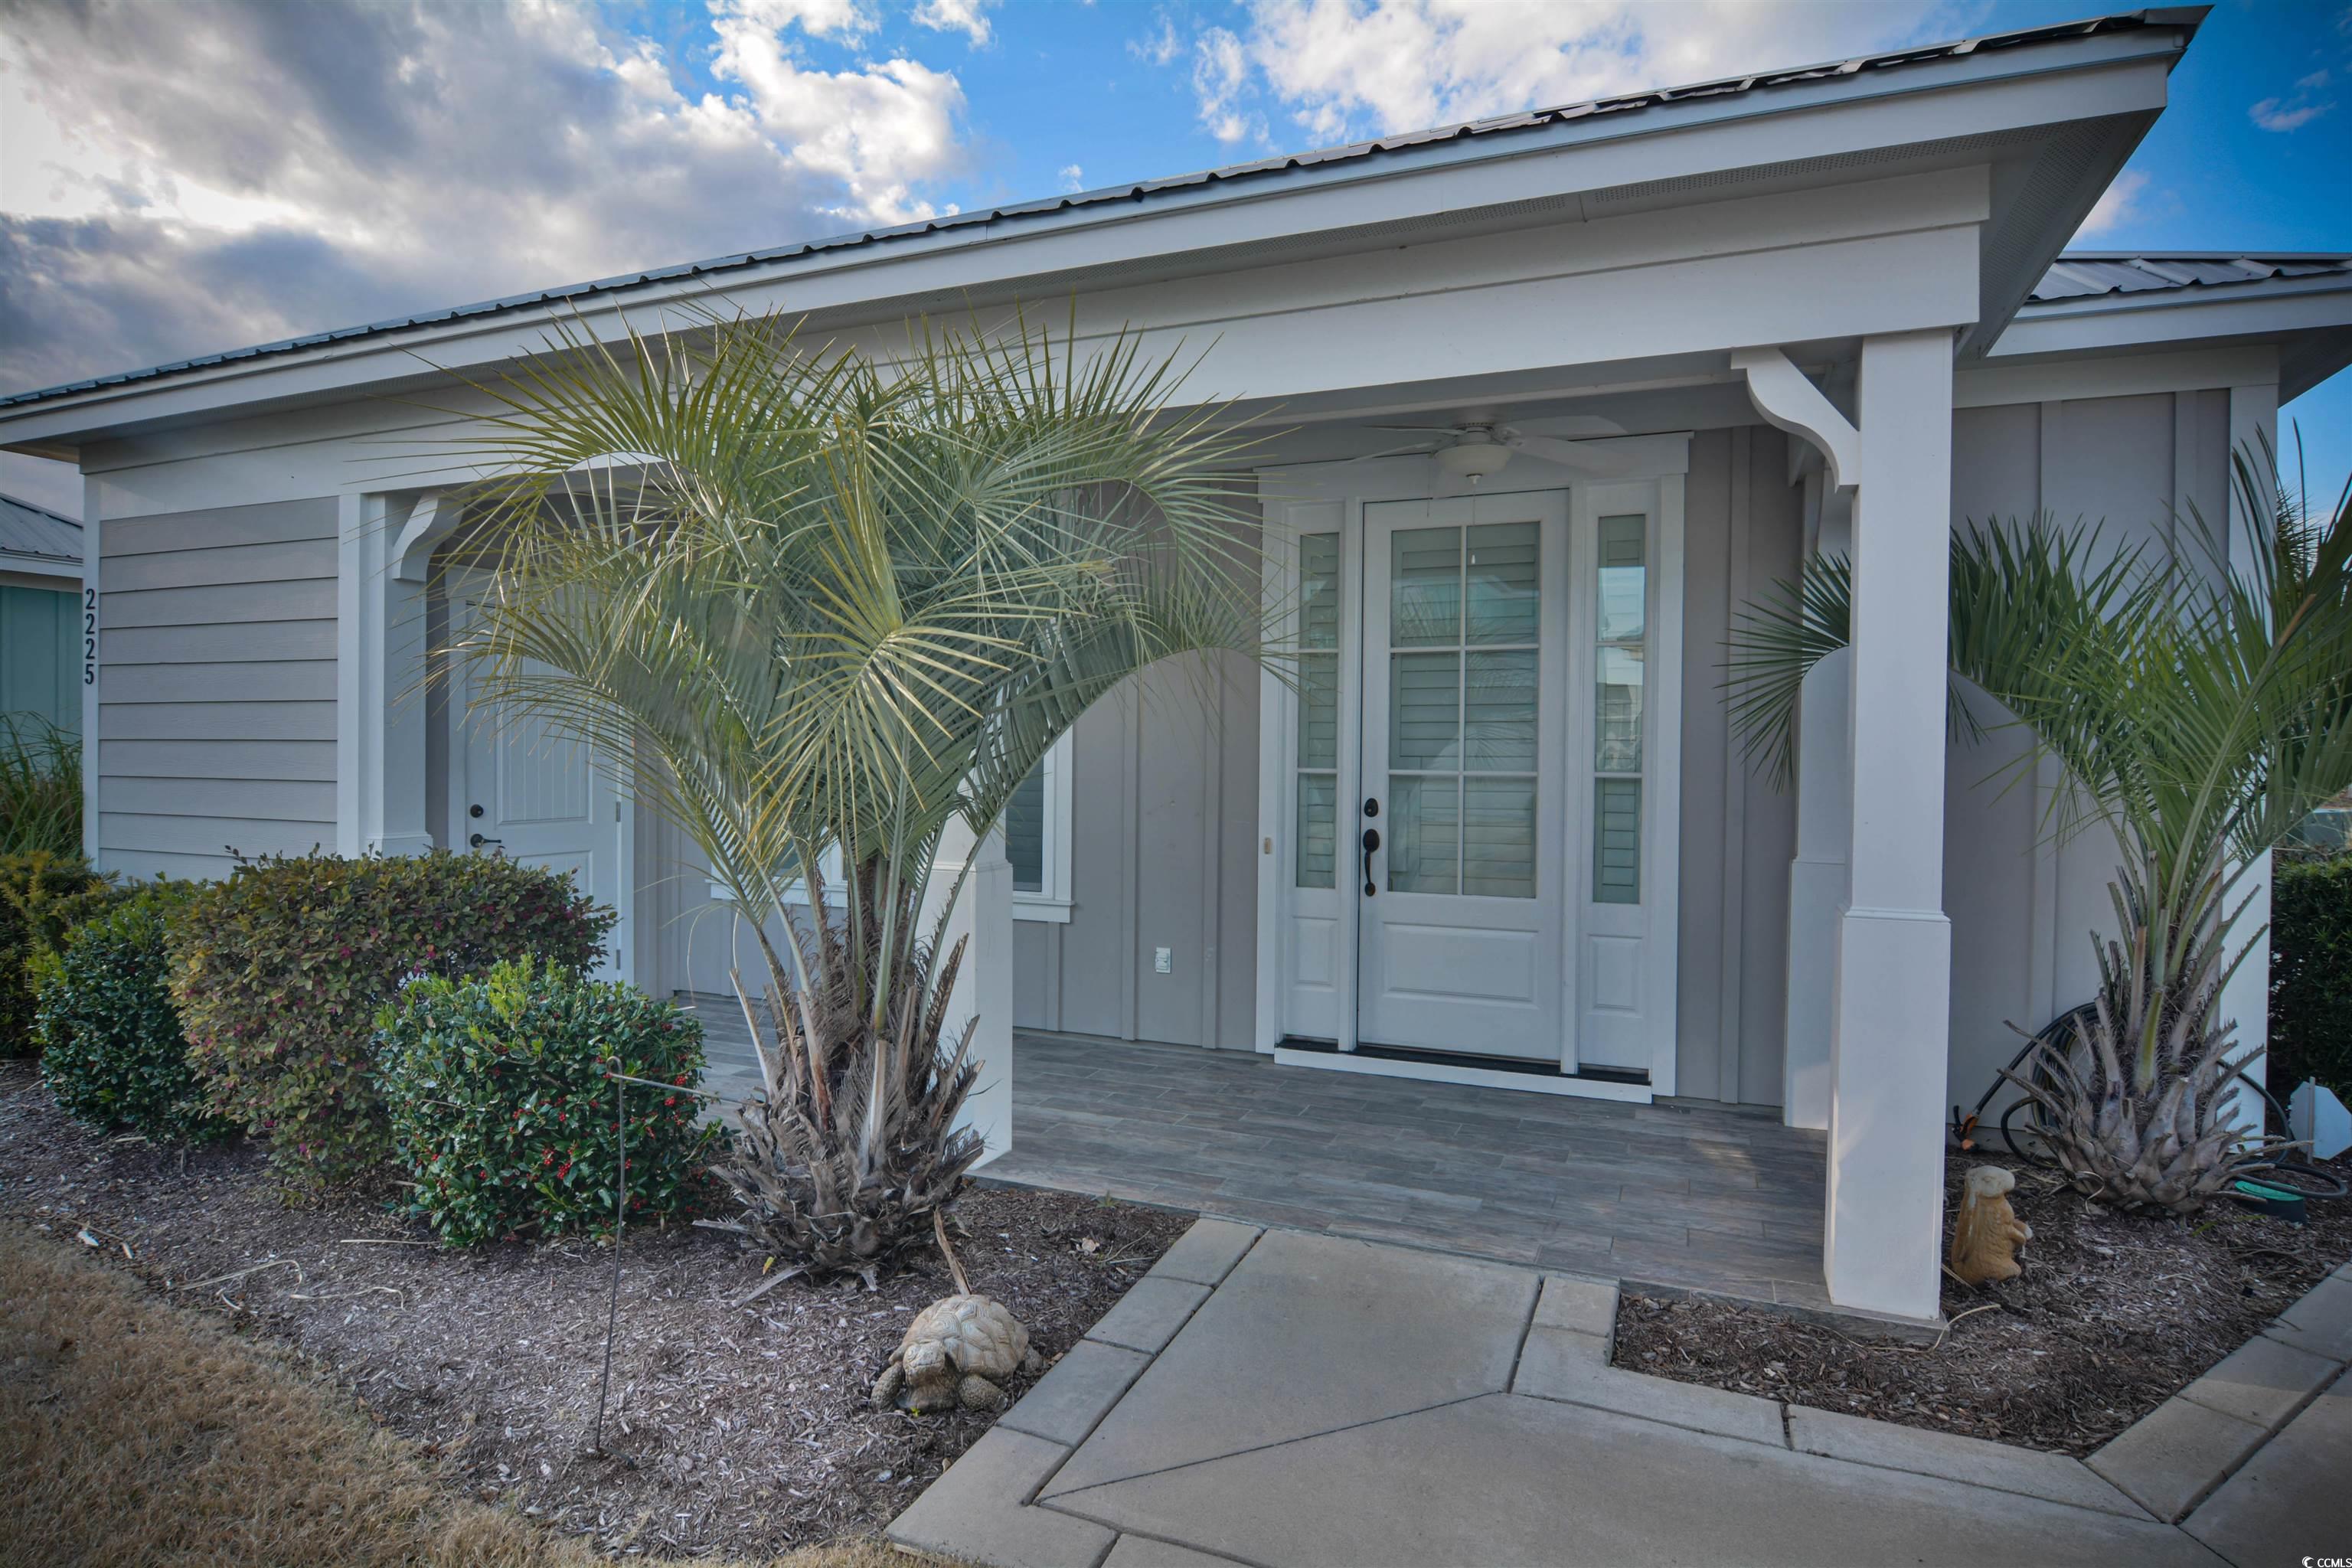 this bungalow offers 2 bedrooms/2 baths with open living area, breakfast bar, master bath with tile shower & double vanity, covered front porch with storage area. the retreat at barefoot has access to a community pool as well as access to the 15,000 square foot salt water pool near the marina.